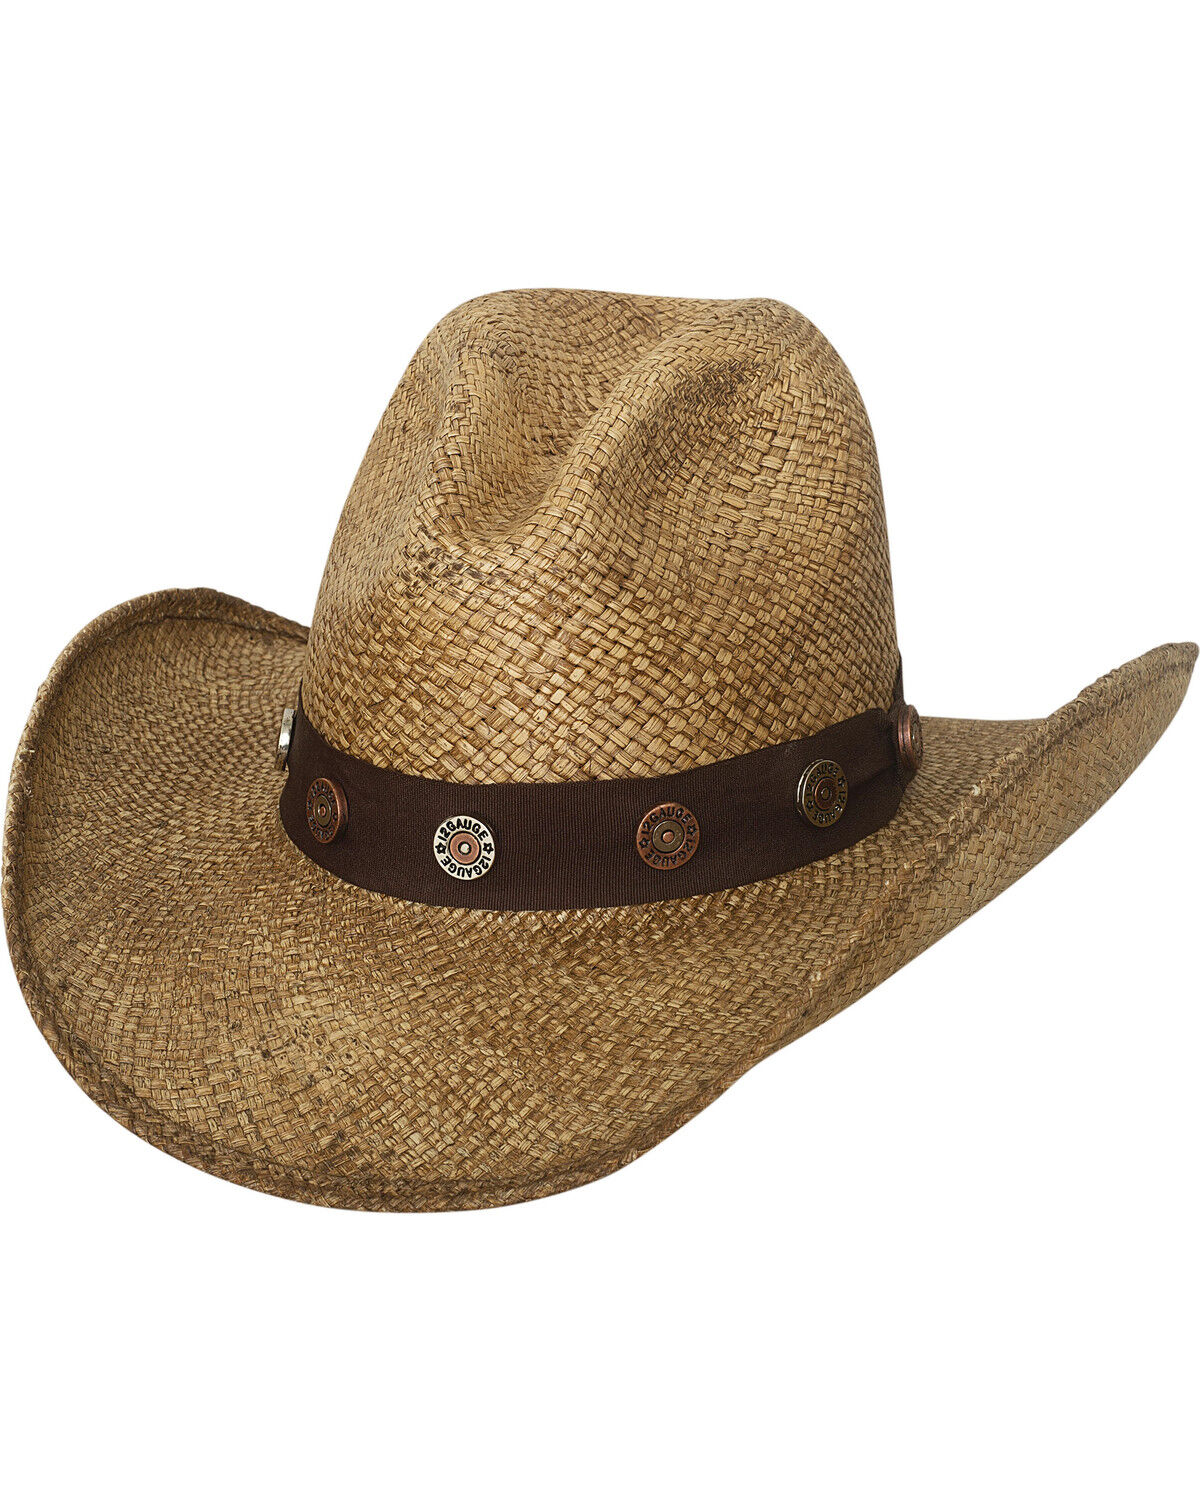 Bullhide Hats Born to Ride Leather Western Cowboy Hat 4014BL